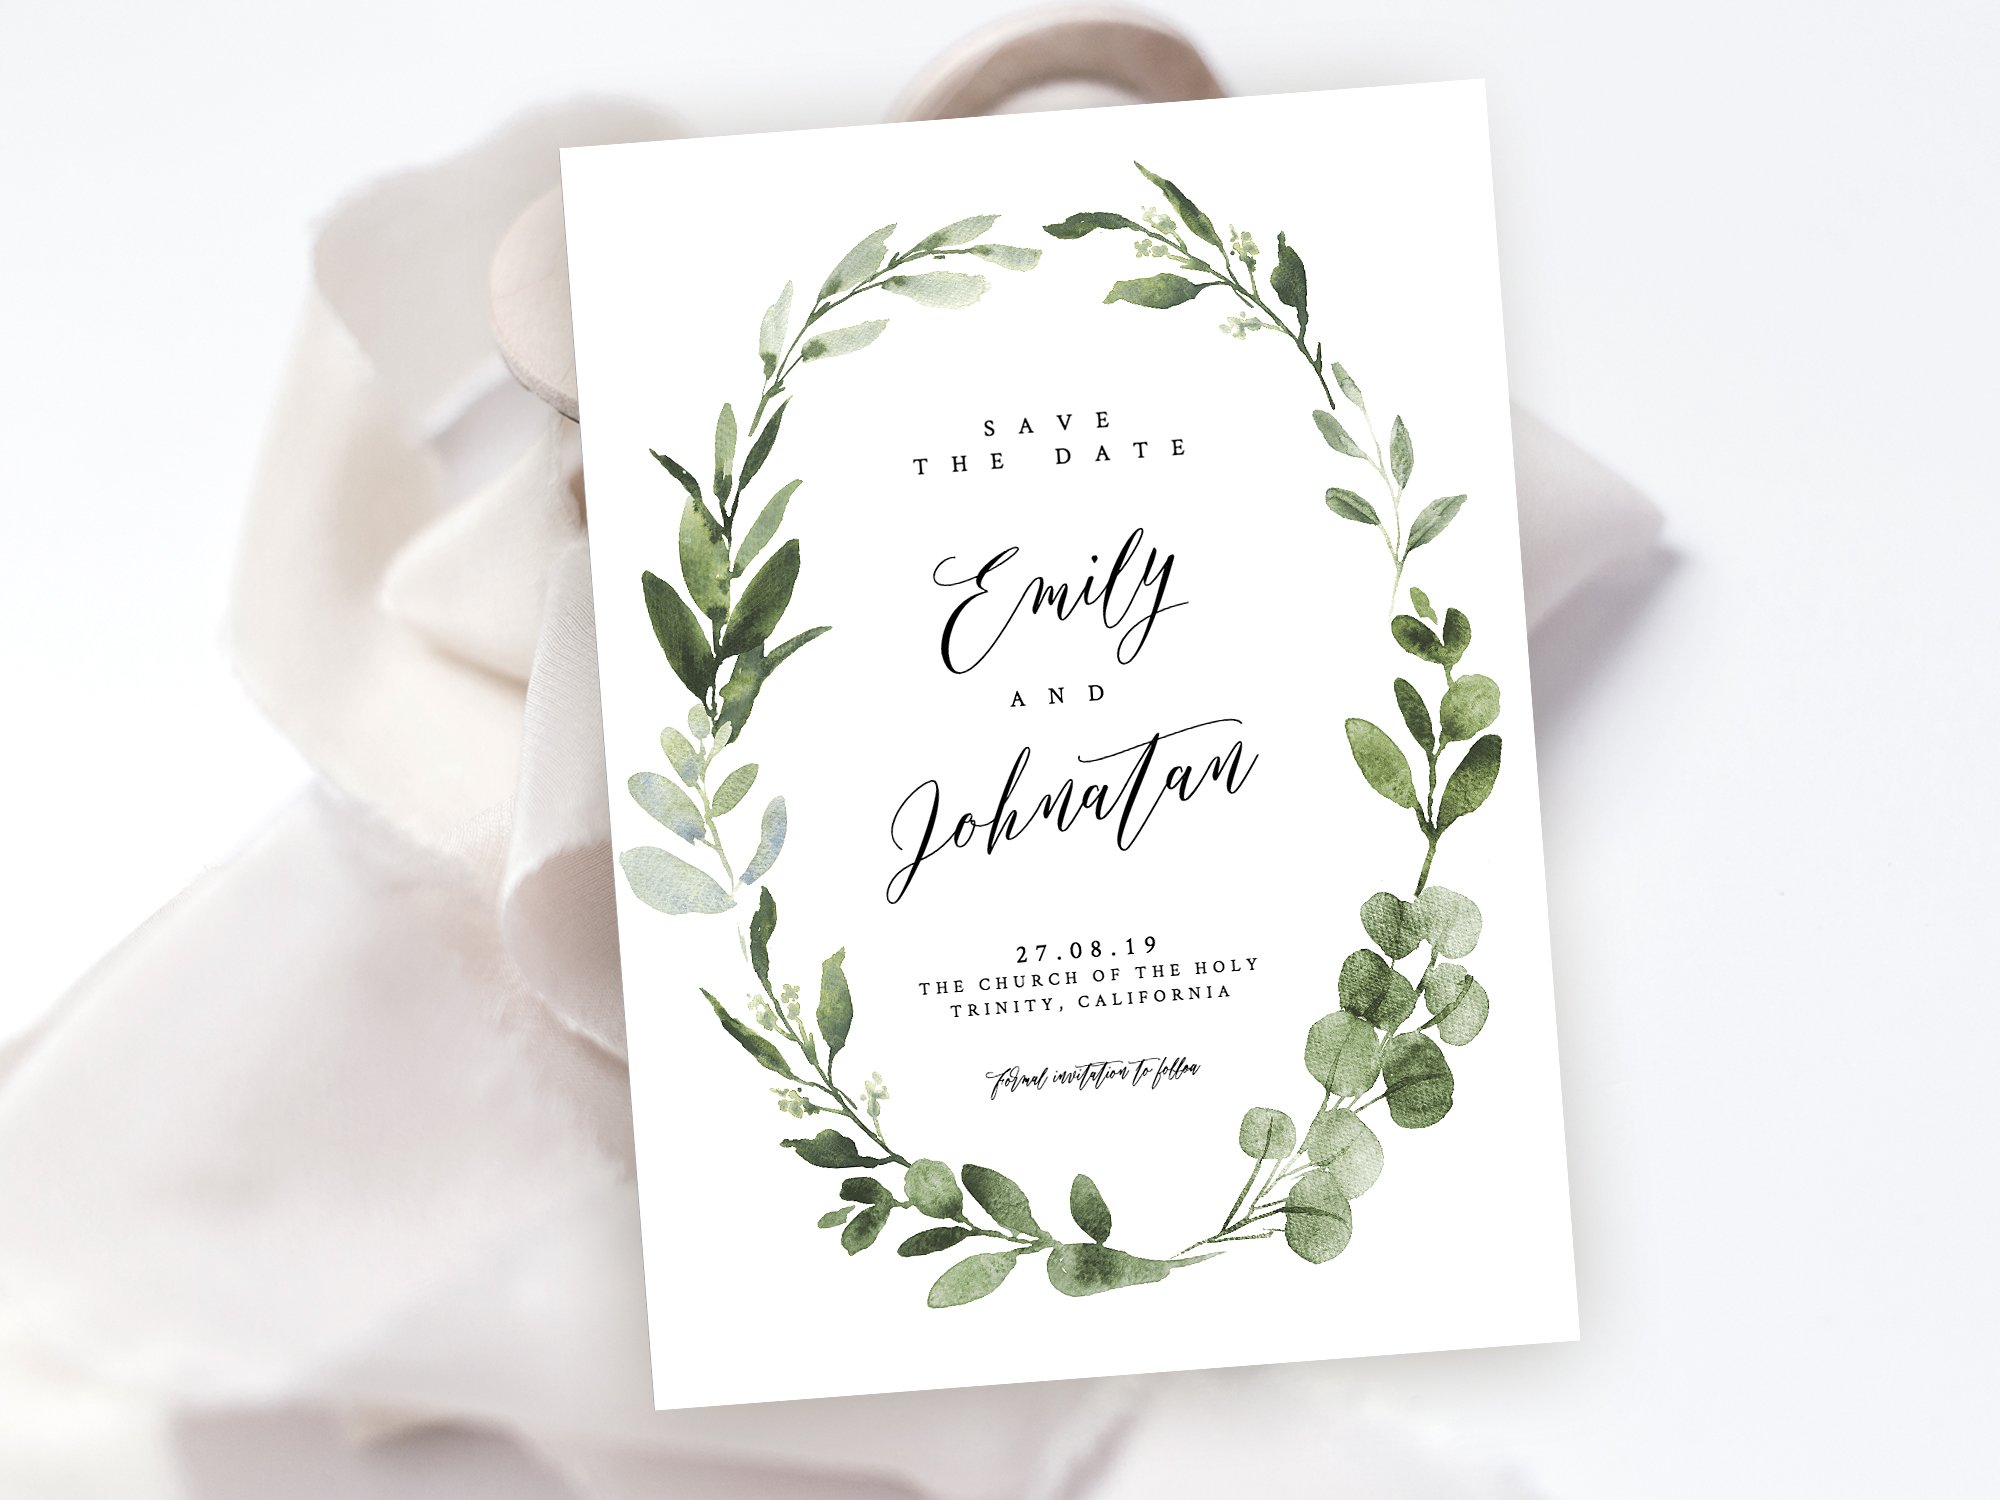 Wedding save the date card with greenery.